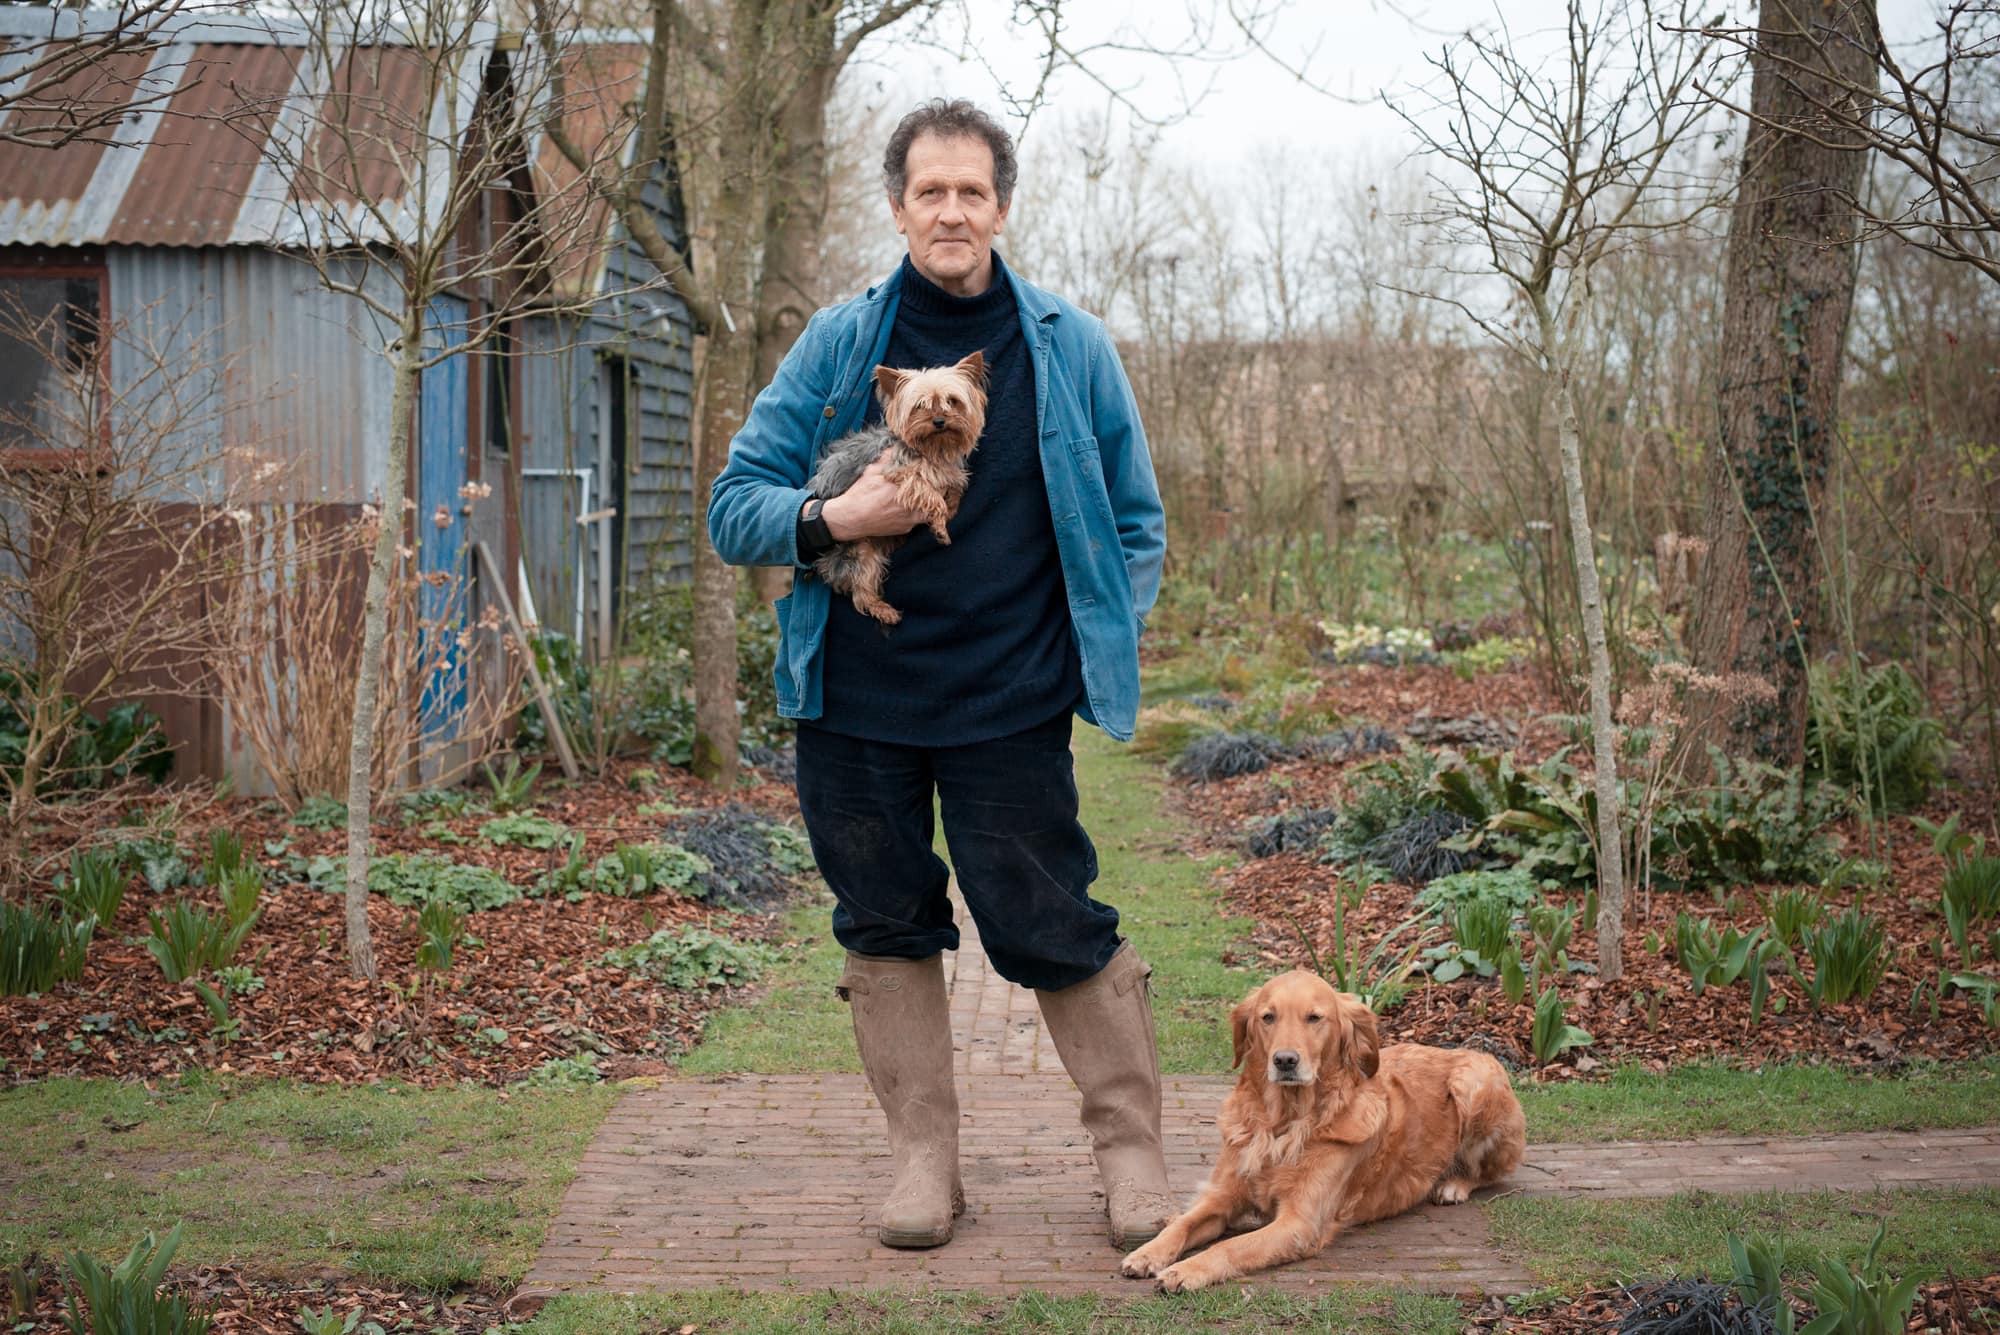 monty don; bbc; gardener's world; garden; nature; netflix; spring; outdoors; grow your own; vegetable; therapy; mental health; new york times; herefordshire; portrait; portraiture; photographer